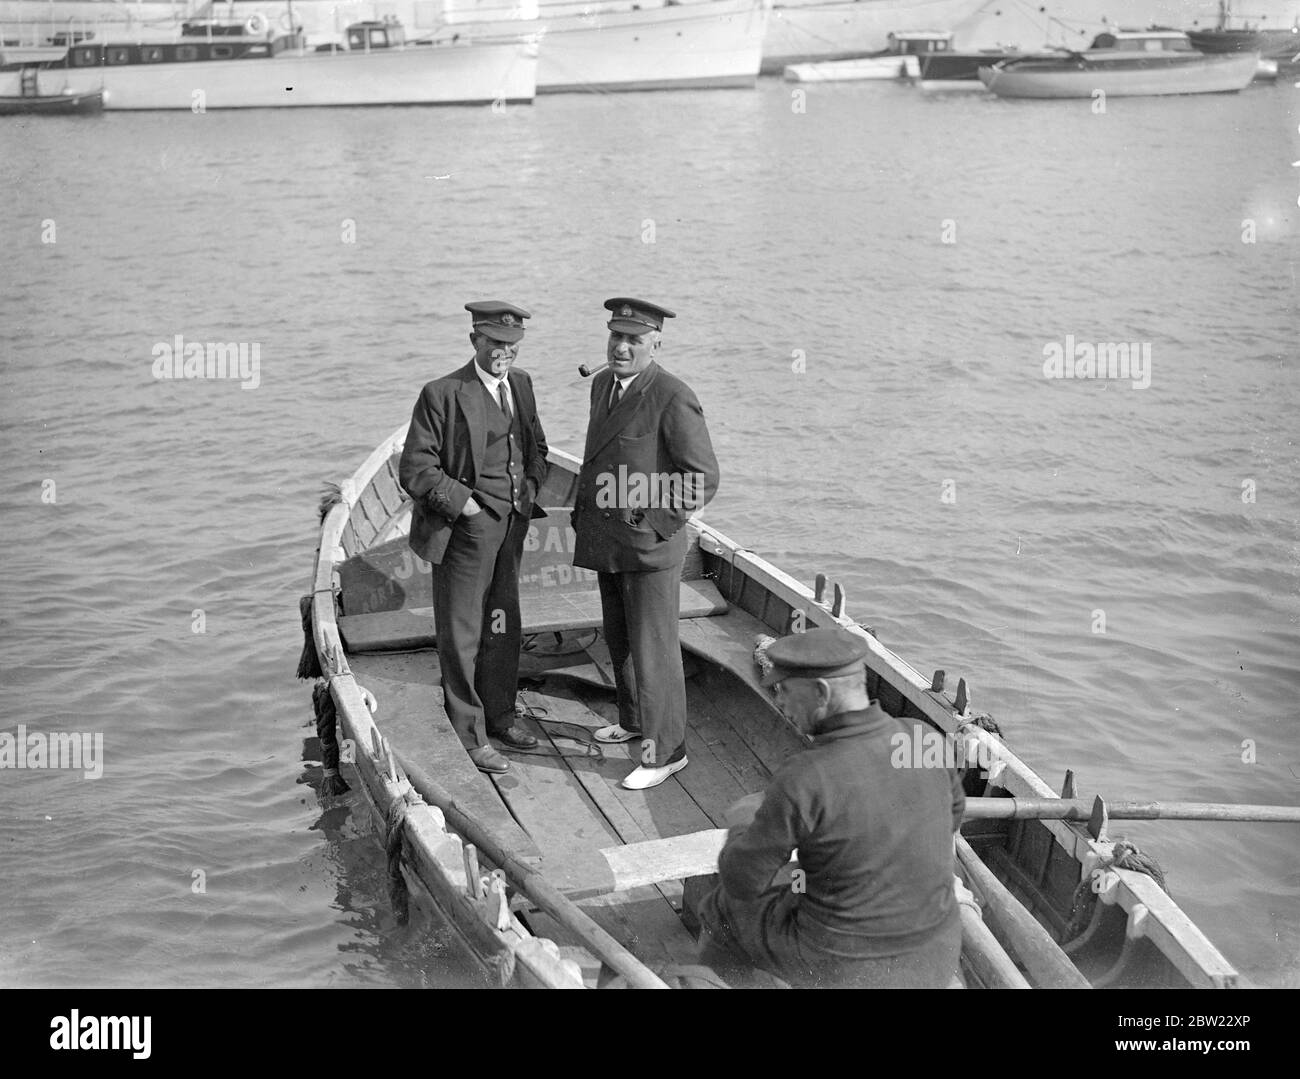 Captain Nad Heard, master of the endeavour I, followed by an admiring crowd when he came ashore at Gosport. The crew came ashore after bringing their yachts safely into port in Hampshire. After their loan 2000 mile voyage across the Atlantic. 1 October 1937. Stock Photo